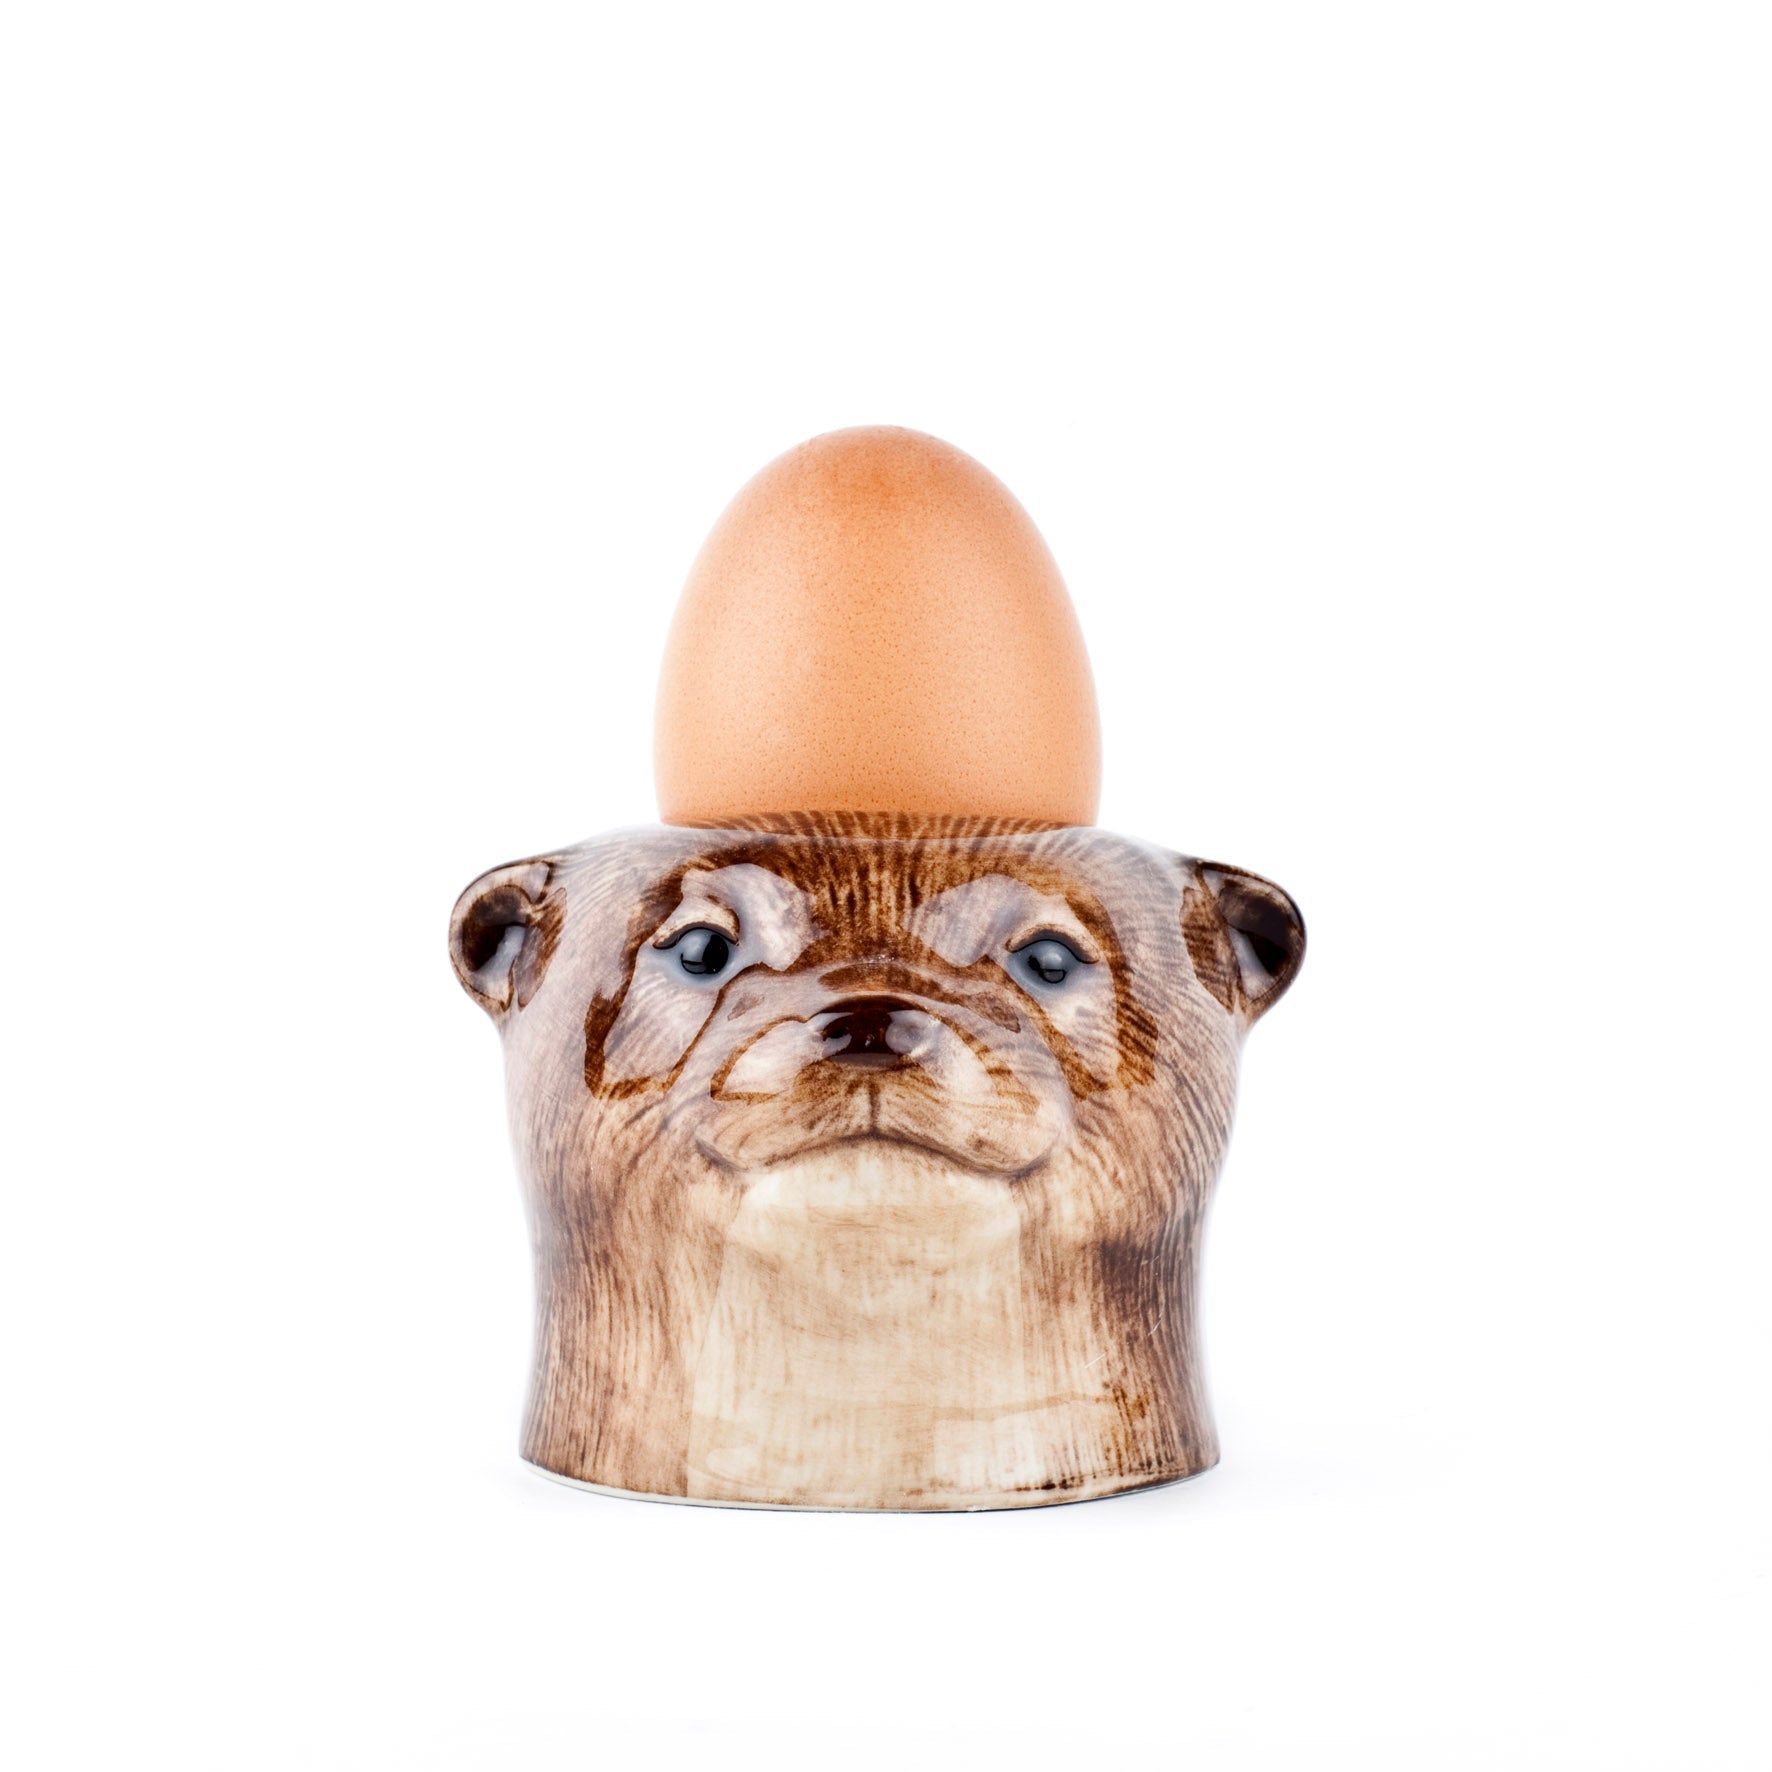 Otter face egg cup